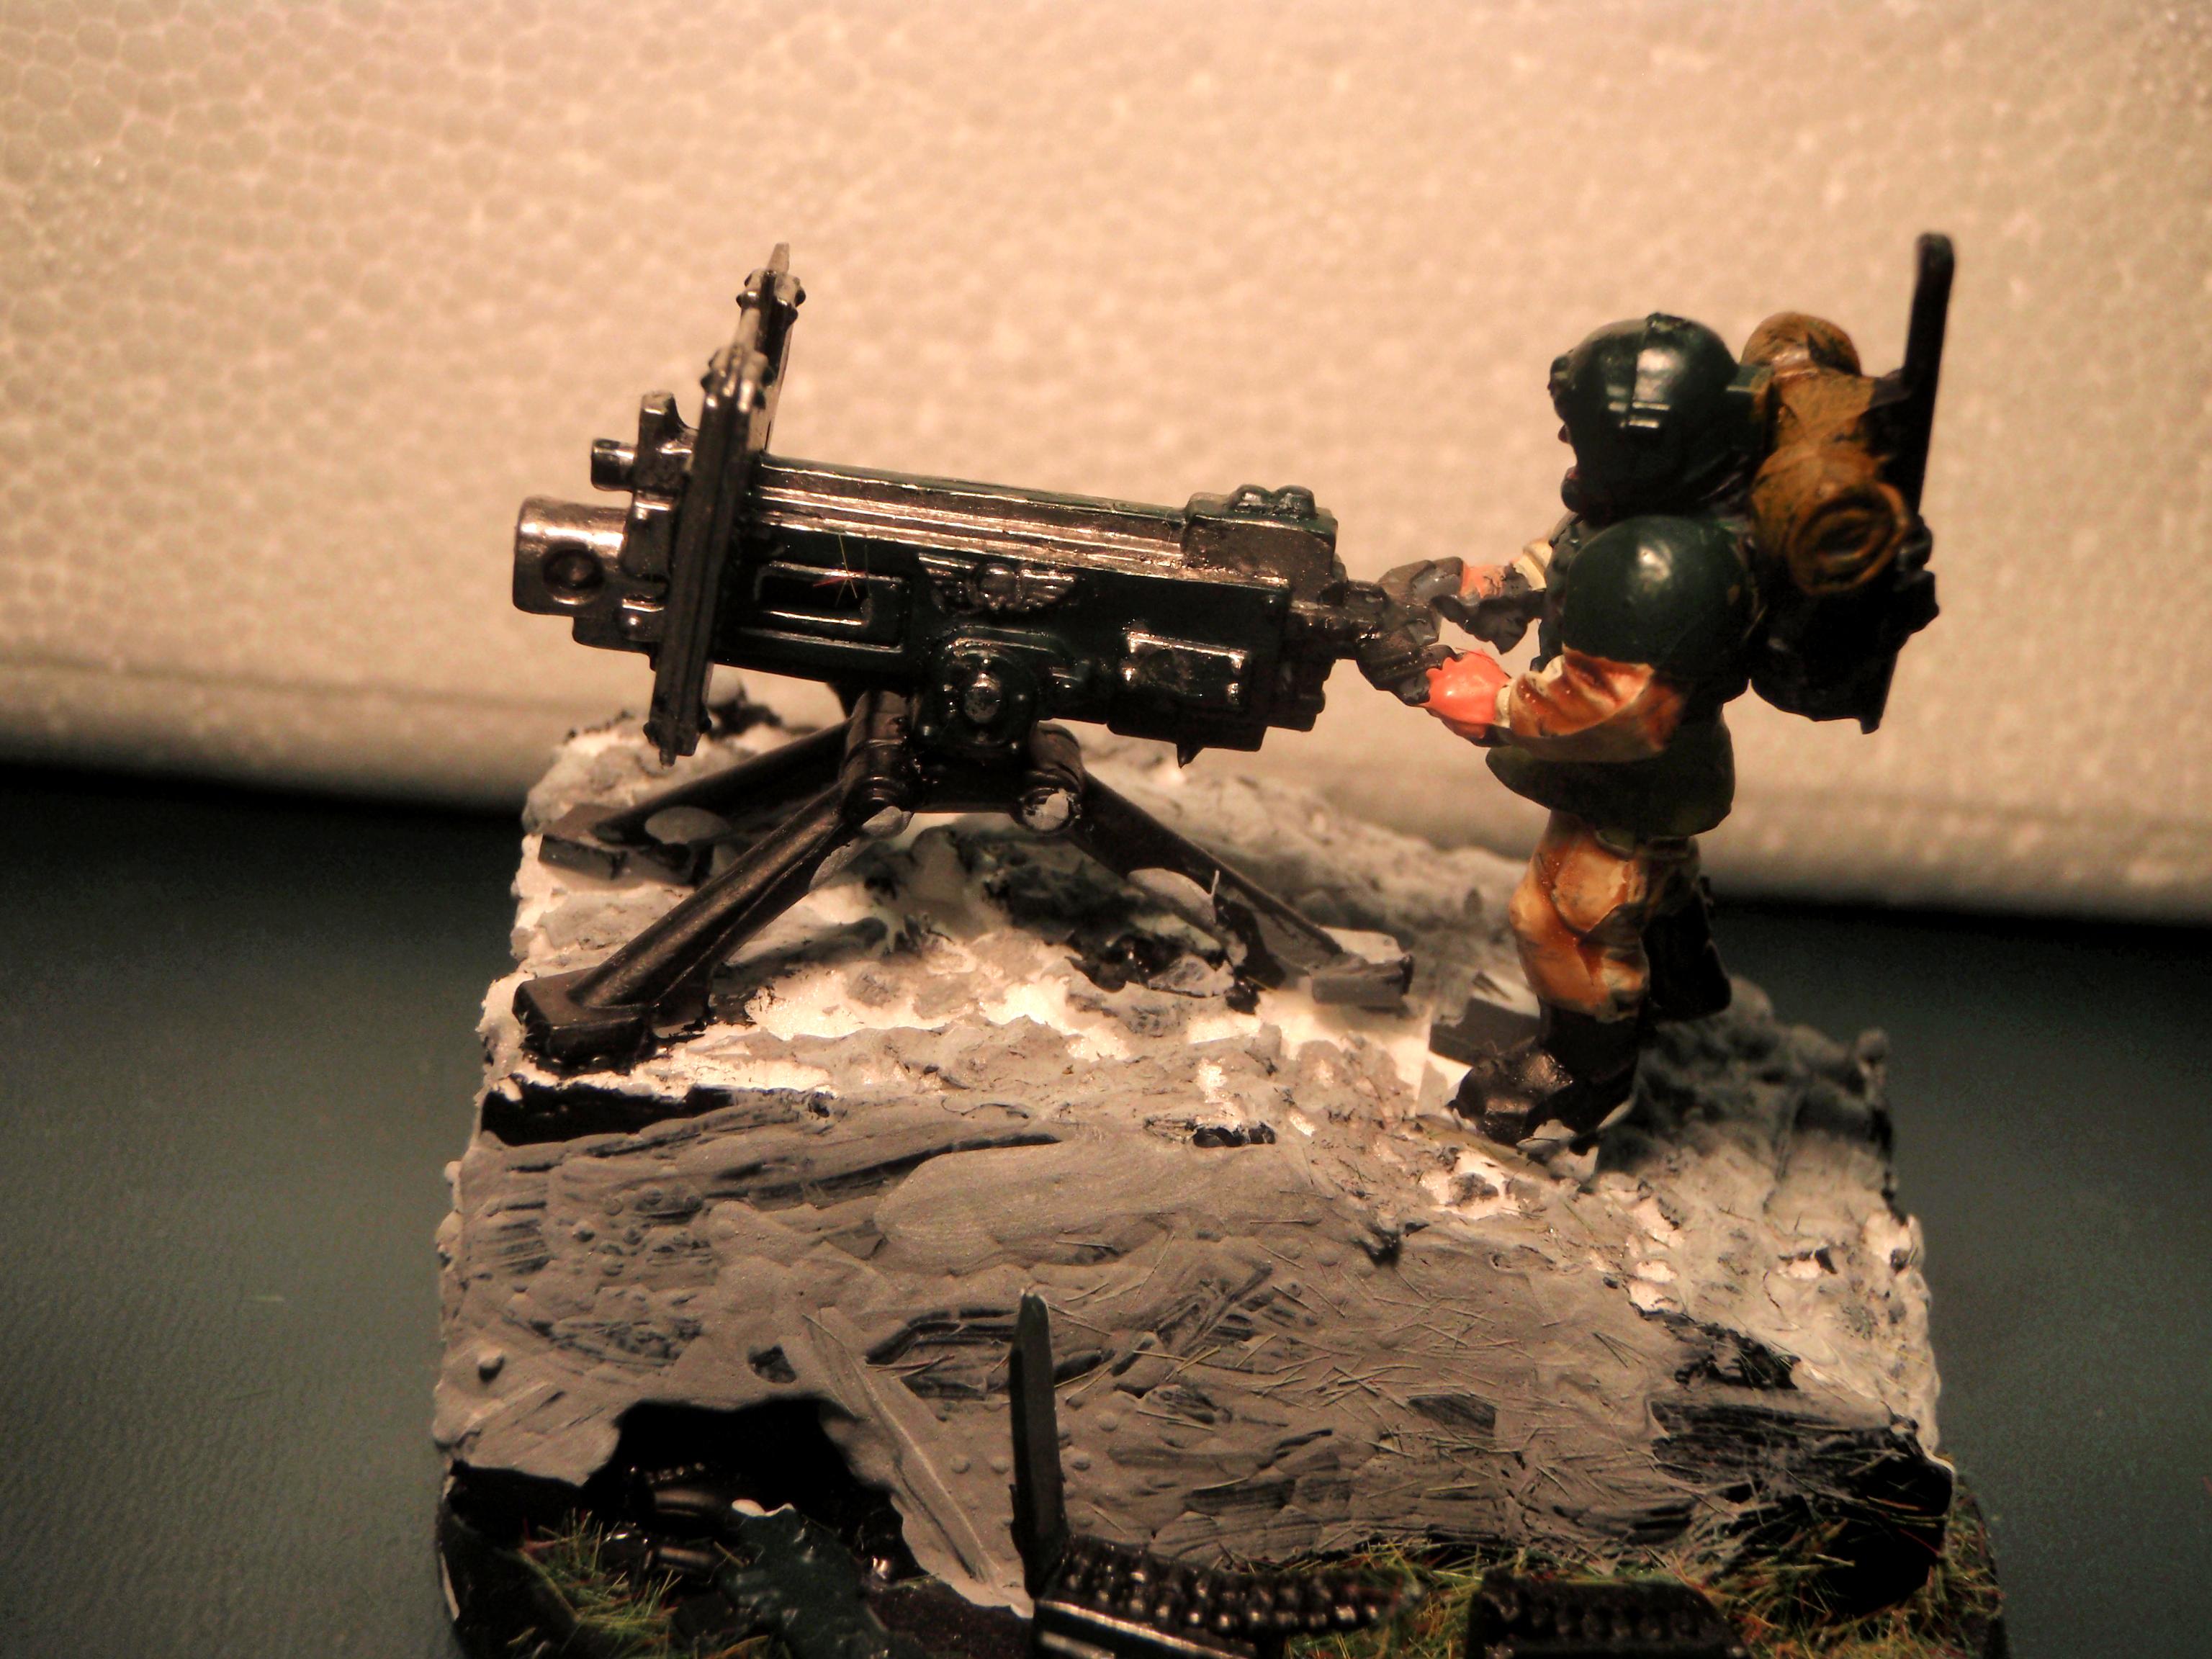 Cadians, Heavy Weapon, Imperial Guard